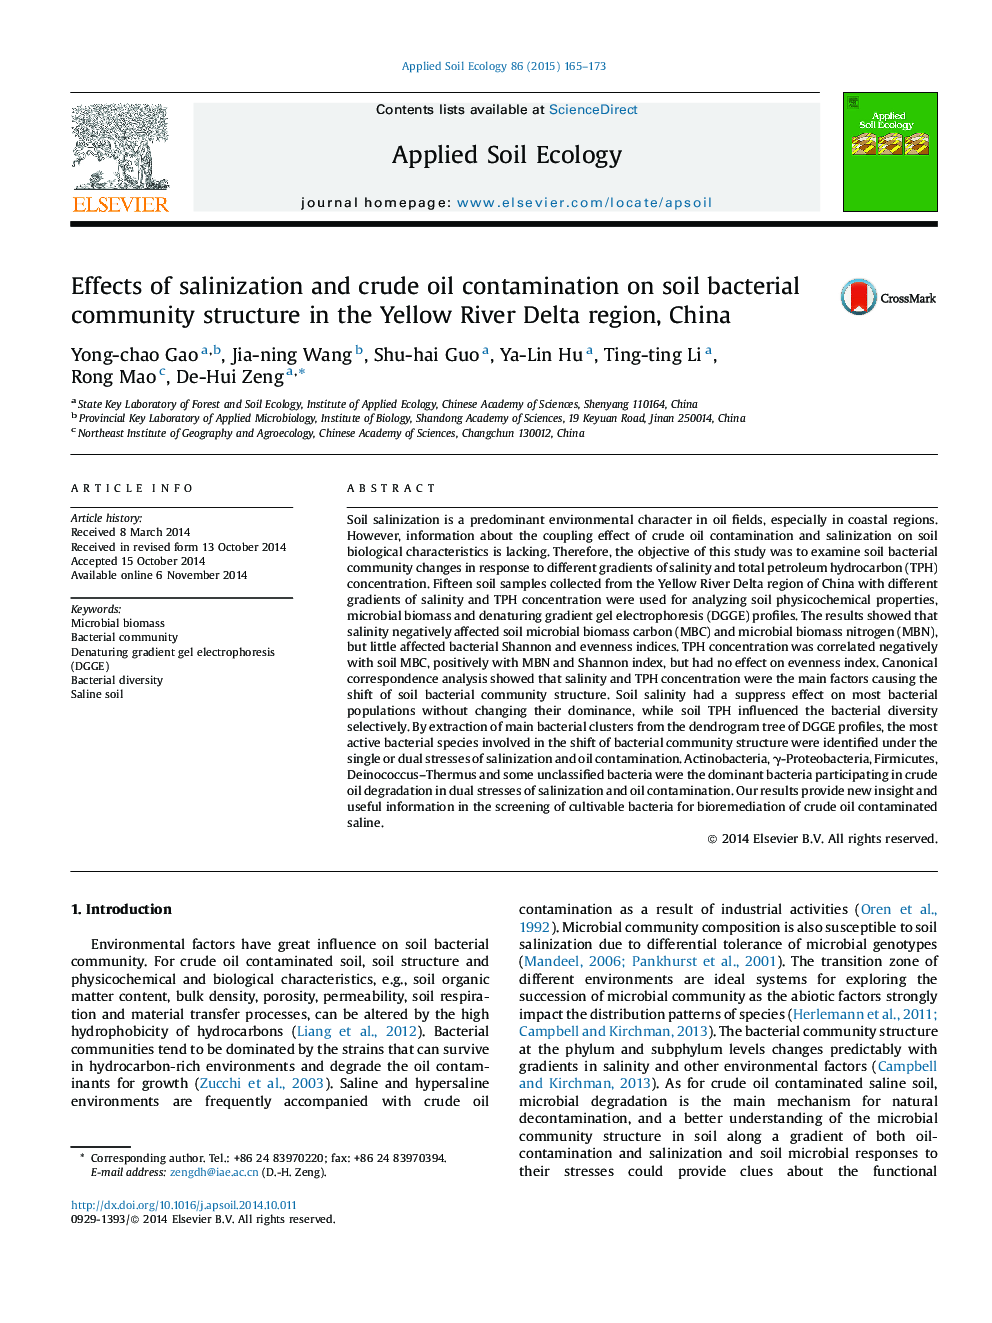 Effects of salinization and crude oil contamination on soil bacterial community structure in the Yellow River Delta region, China